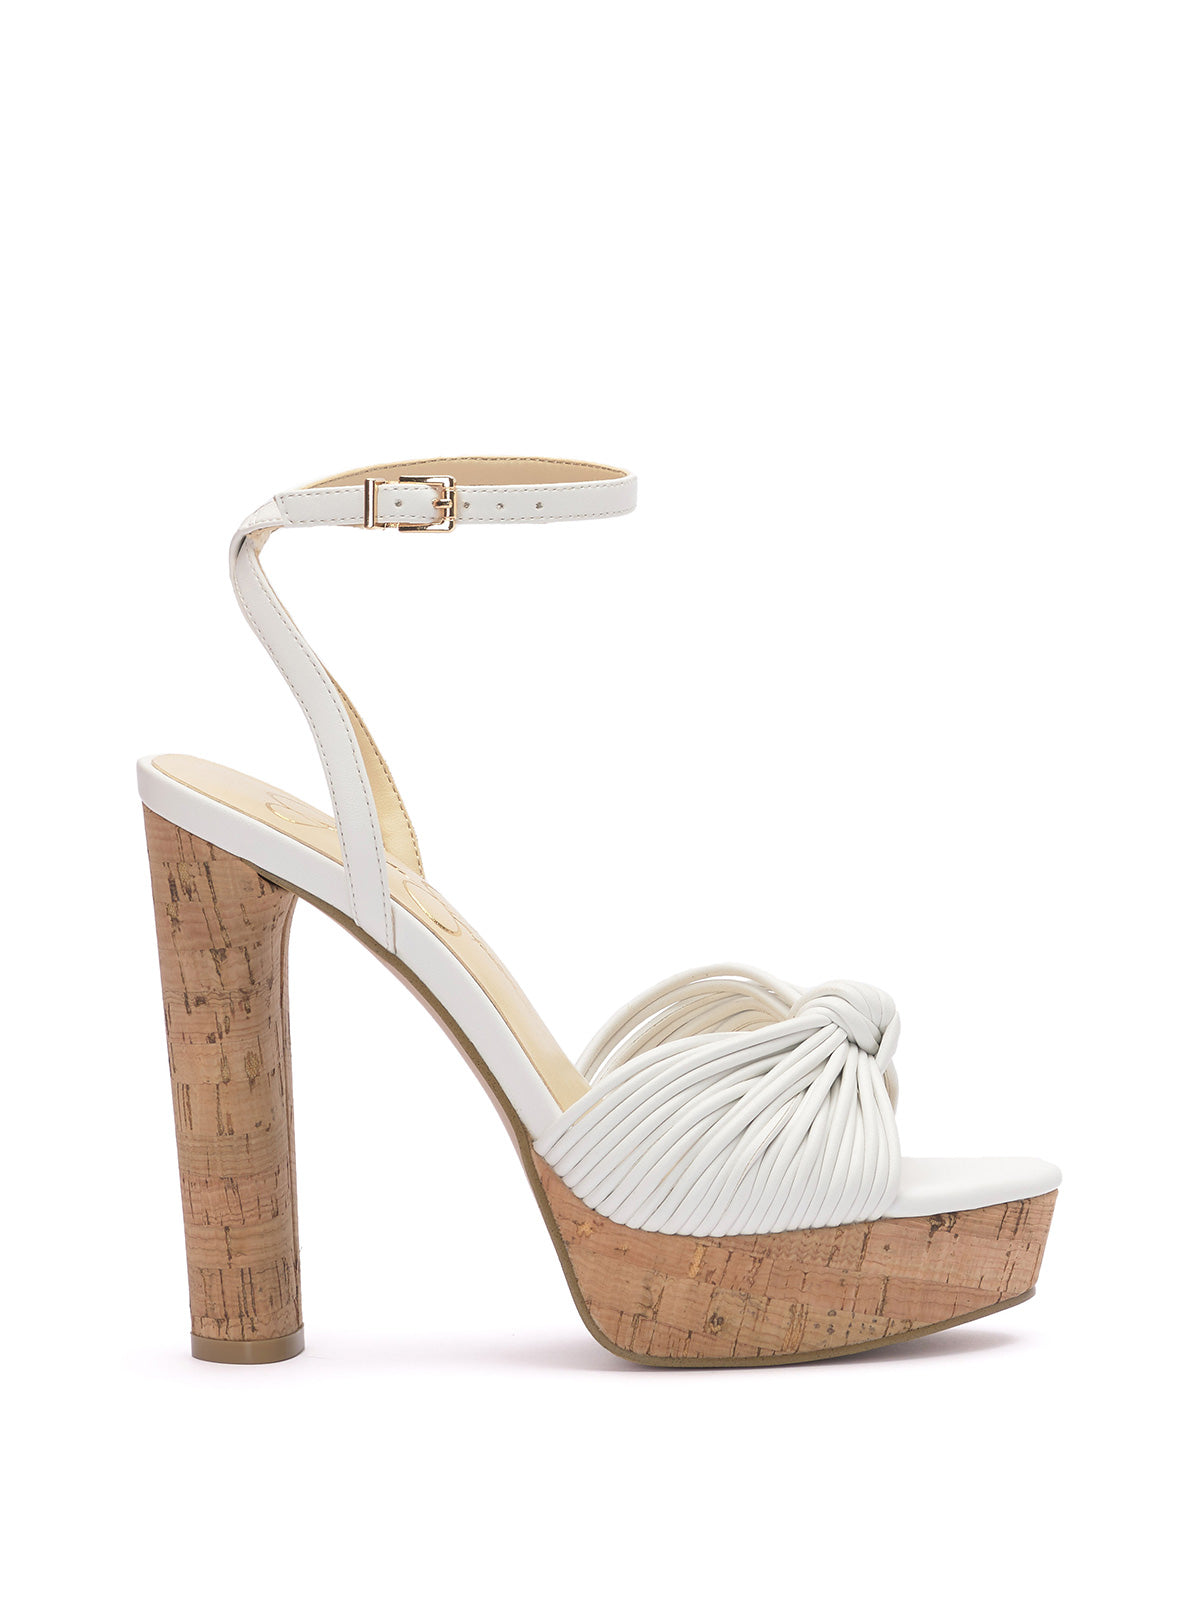 Image of Immie Platform Sandal in White